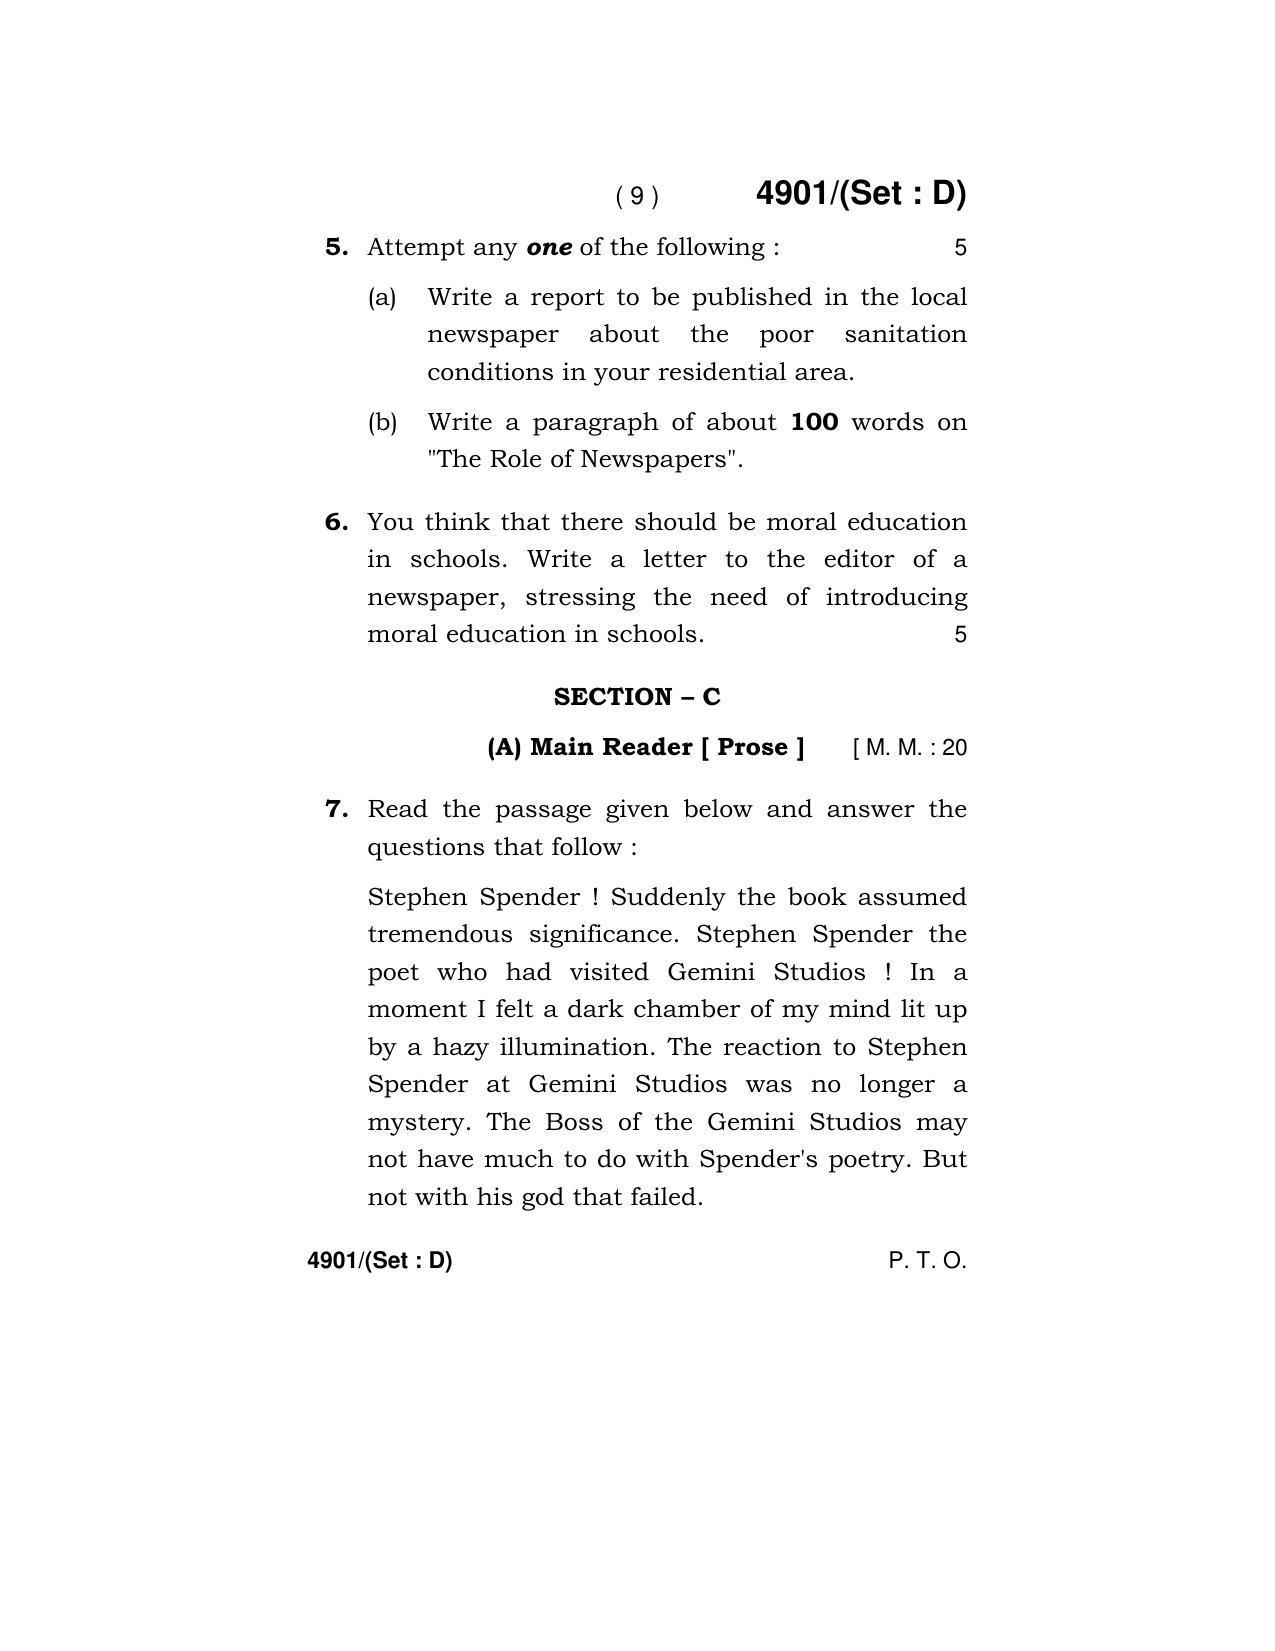 Haryana Board HBSE Class 12 English Core 2020 Question Paper - Page 57